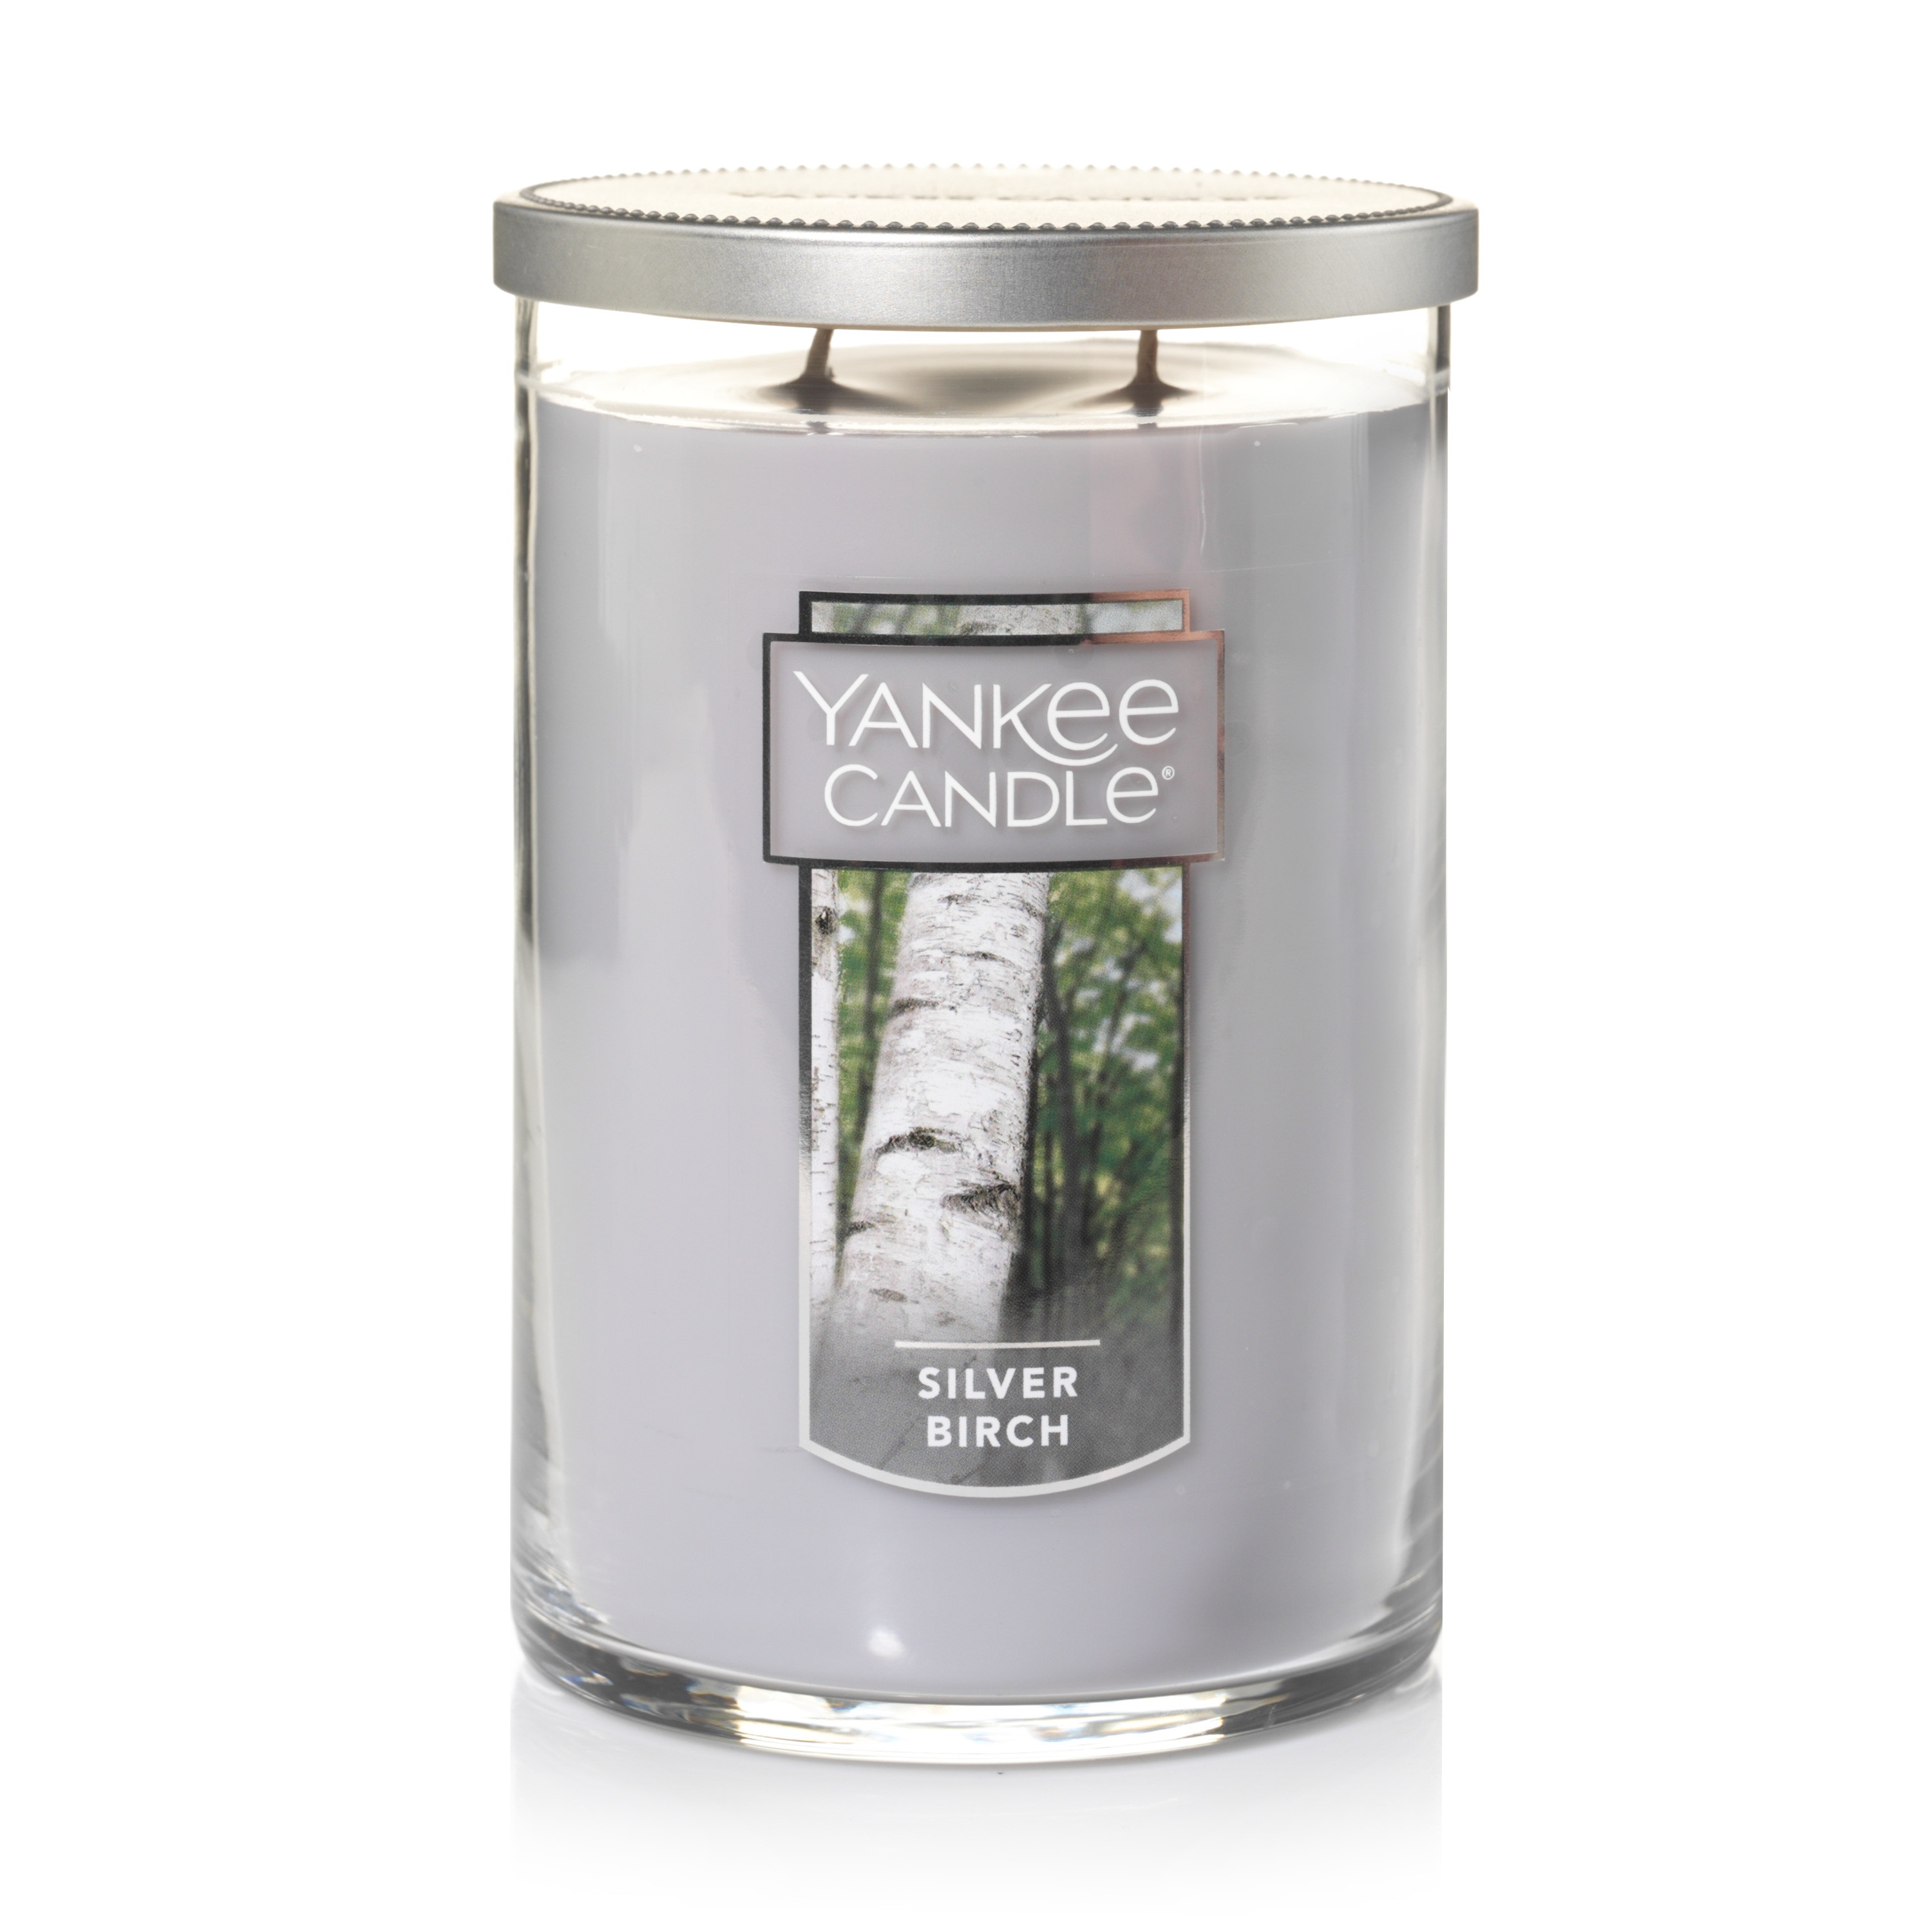 Yankee Candle Silver Birch - Large 2 Wick Tumbler Candle - image 1 of 5